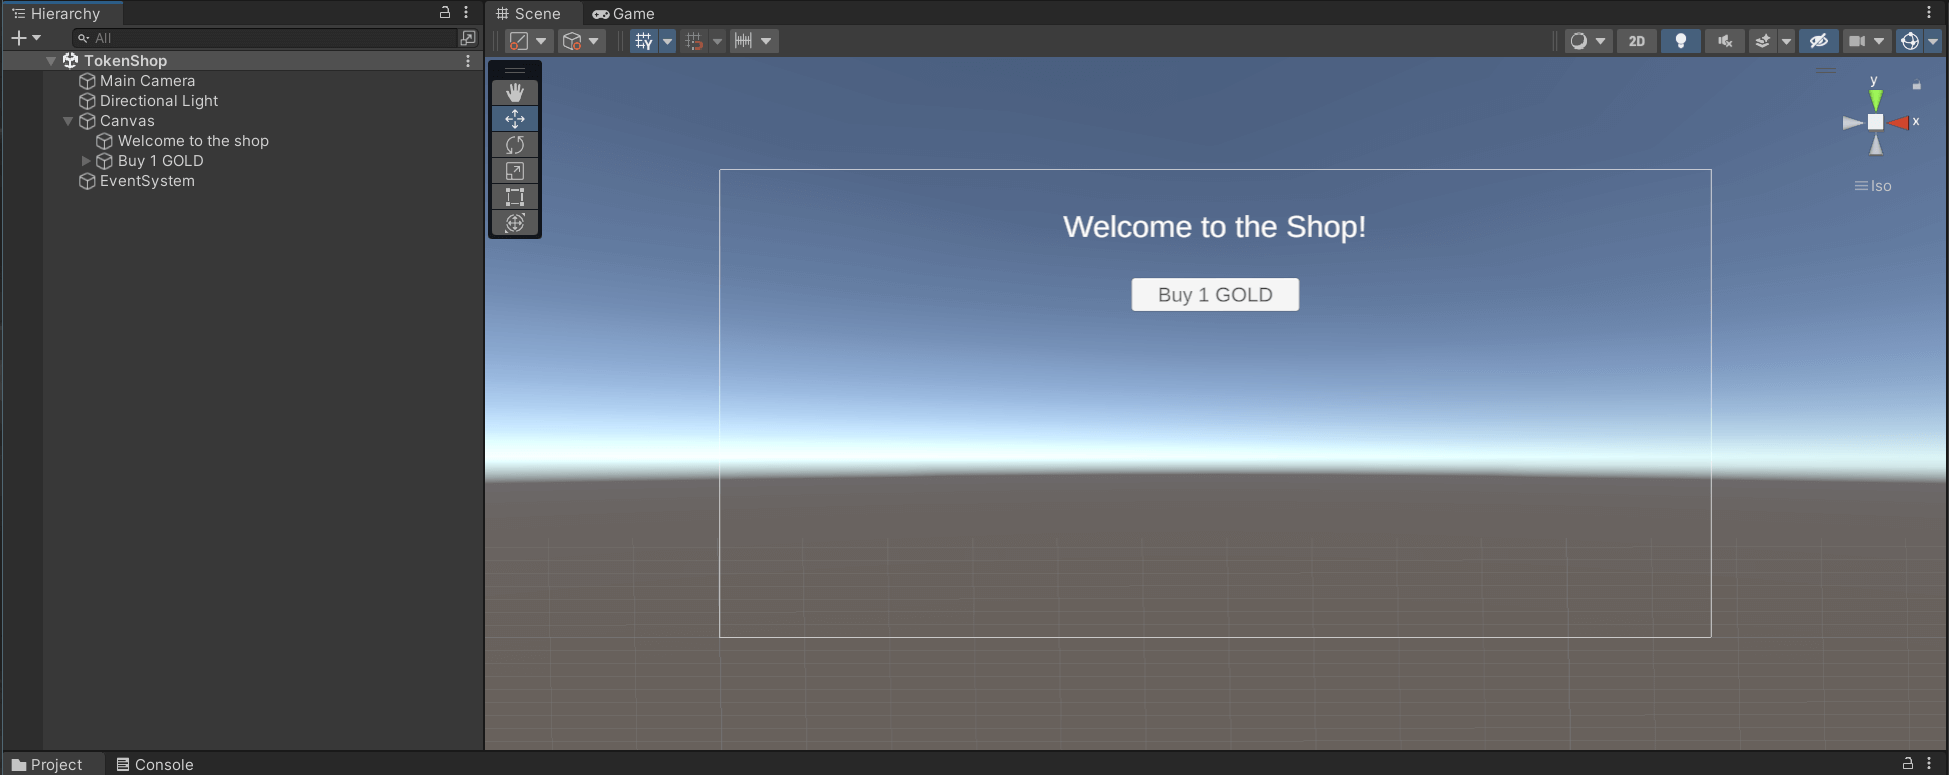 Preview of unity so far